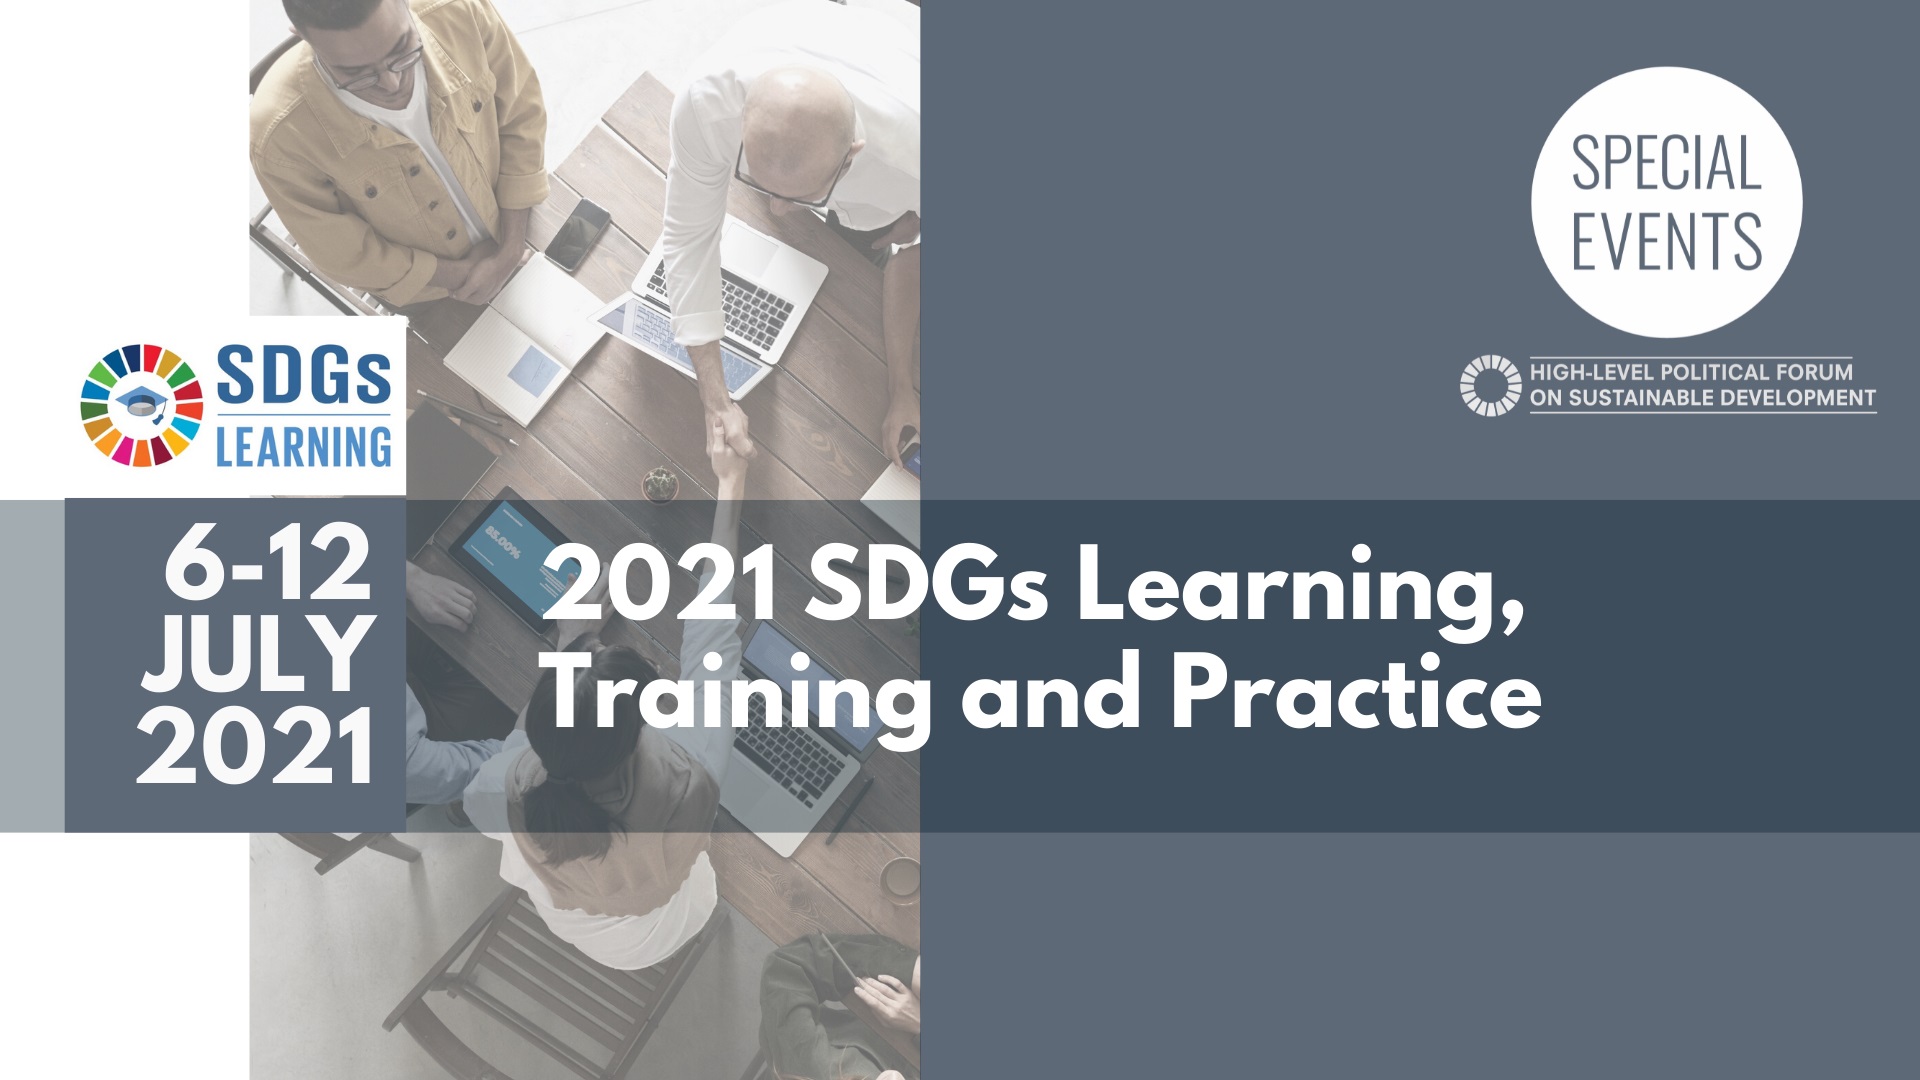 2021 SDGs Learning Training and Practice